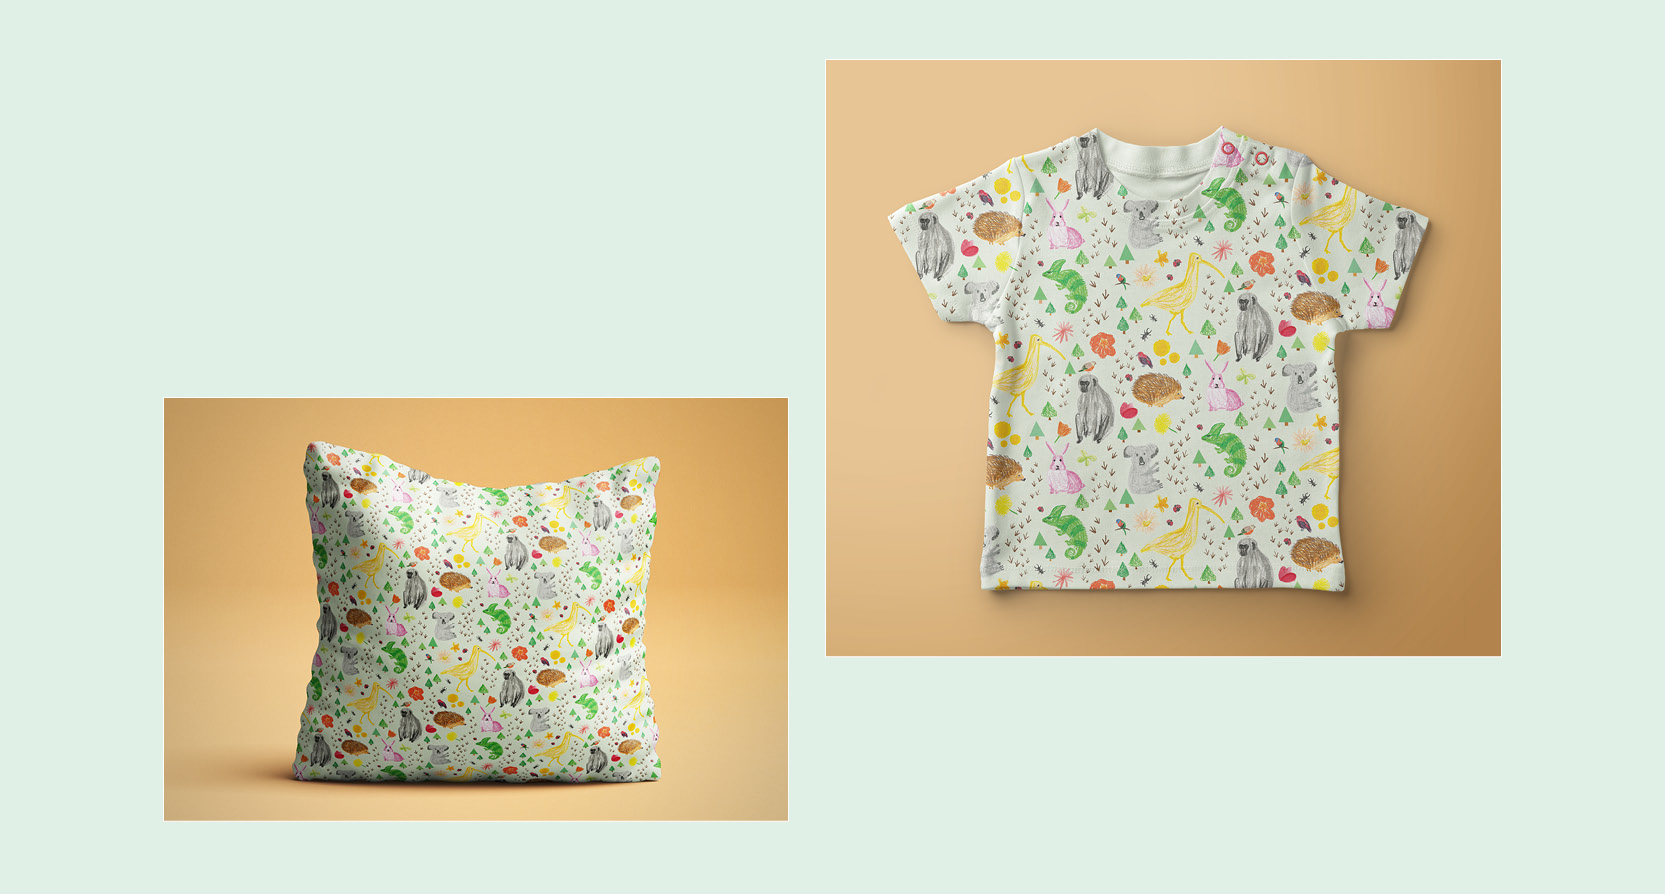 A photo of a pillow and a t-shirt using the same colorful pattern with animal and plant drawings.